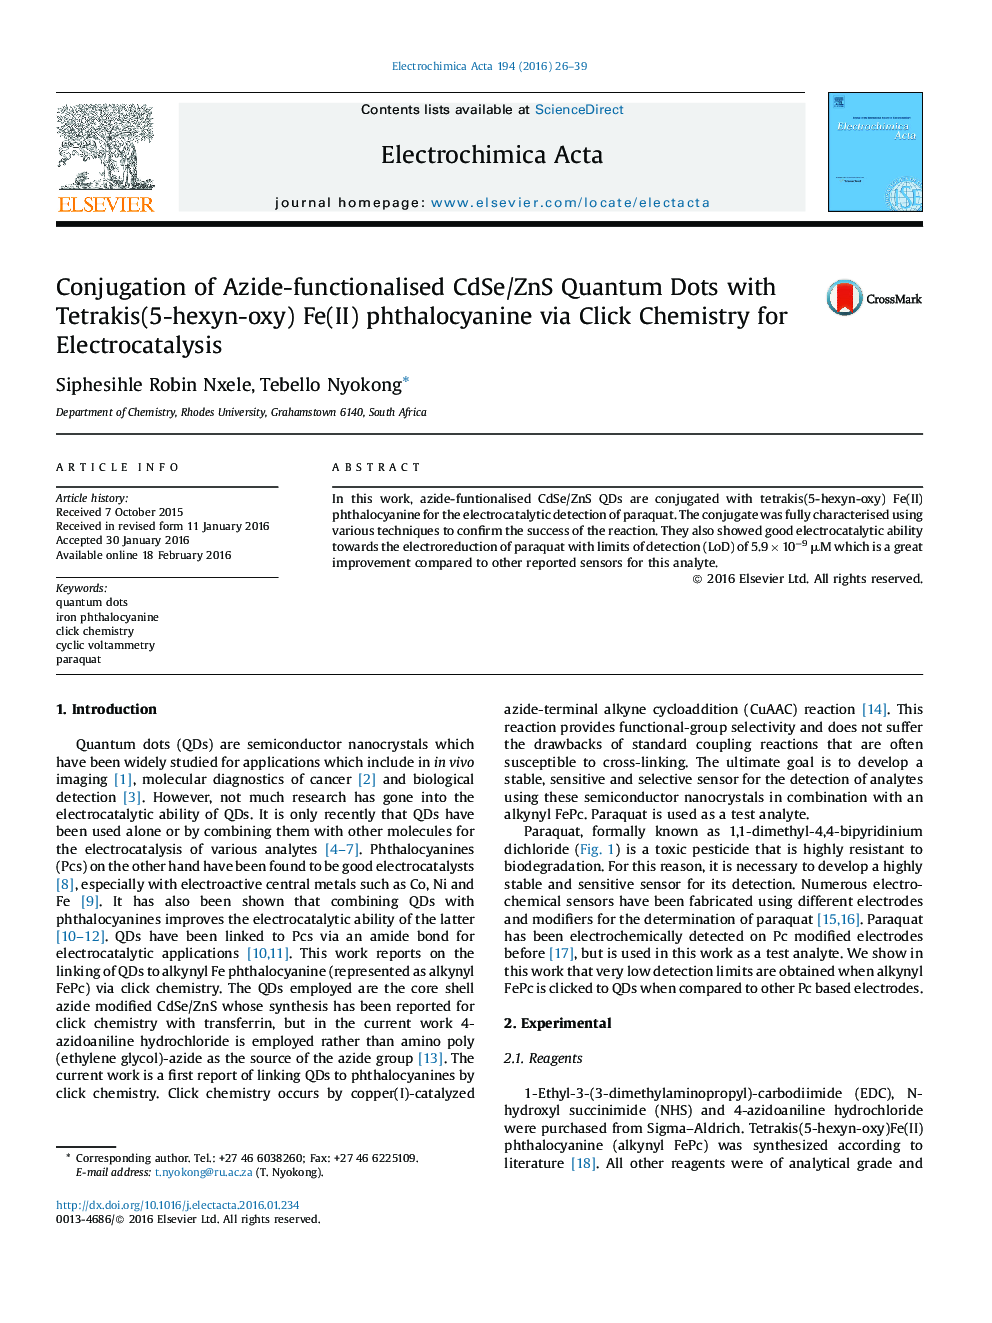 Conjugation of Azide-functionalised CdSe/ZnS Quantum Dots with Tetrakis(5-hexyn-oxy) Fe(II) phthalocyanine via Click Chemistry for Electrocatalysis